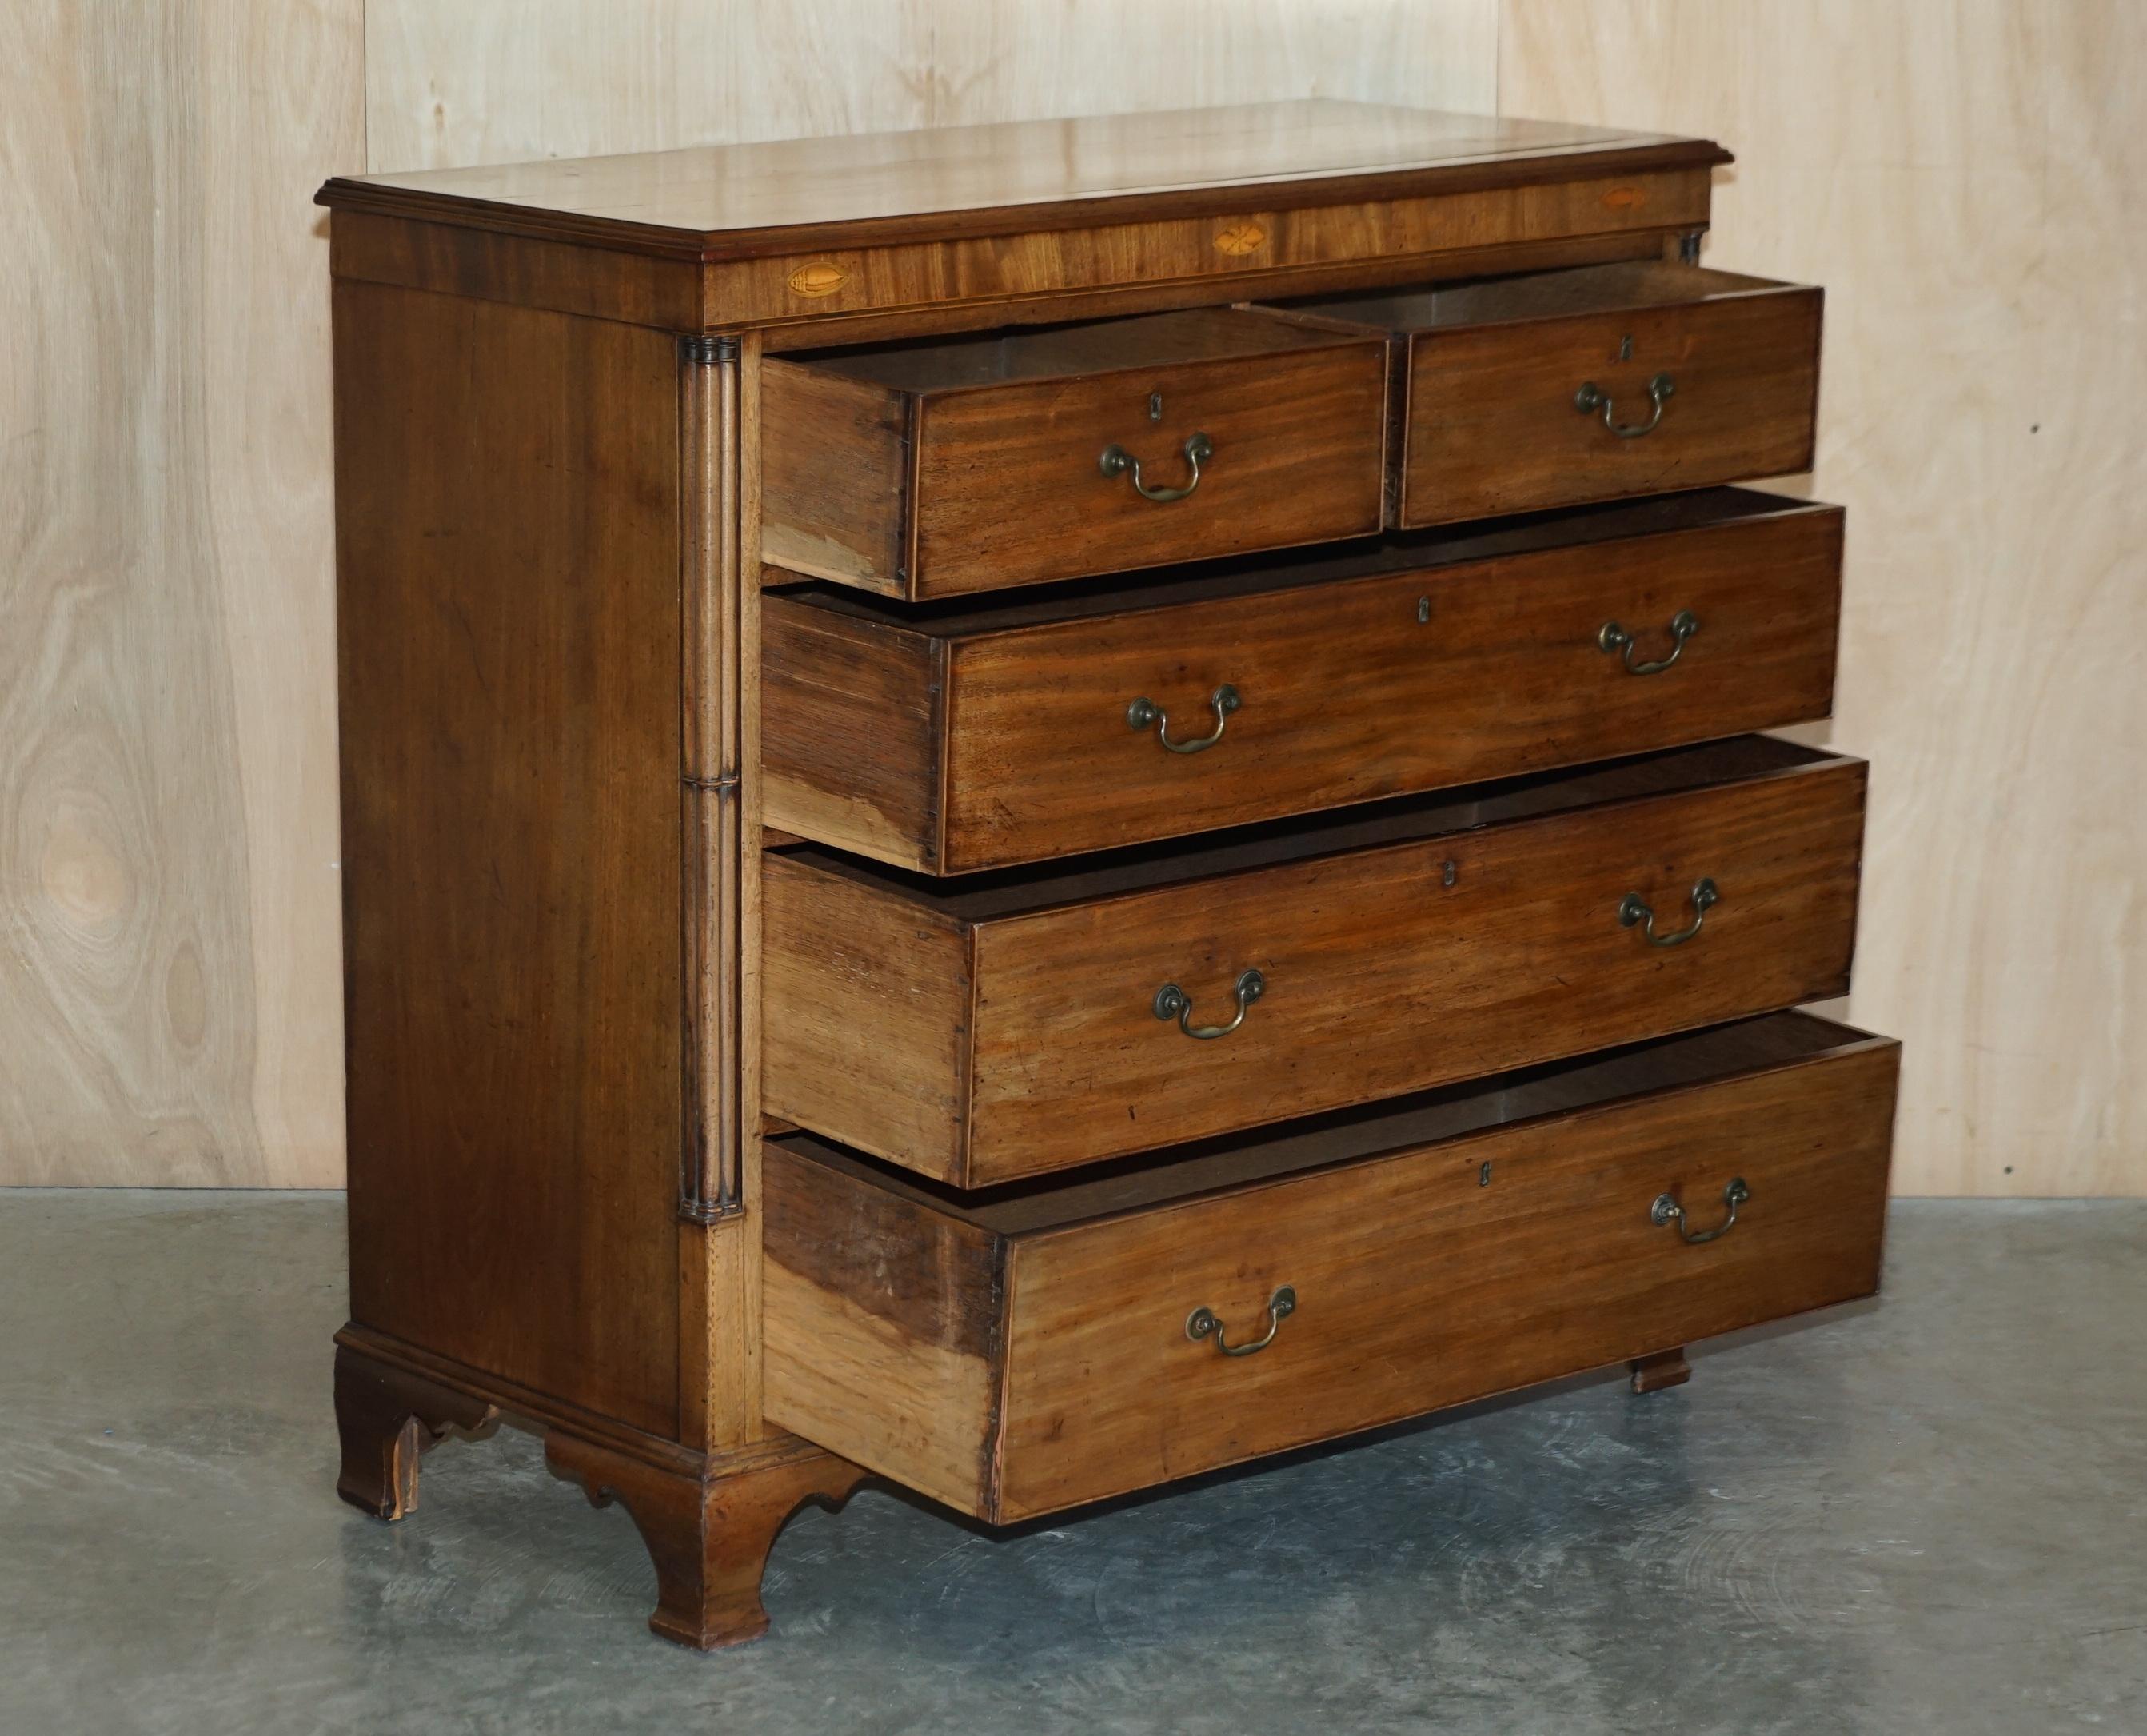 LARGE FiNE ANTIQUE THOMAS CHIPPENDALE SHERATON REVIVAL HARDWOOD CHEST OF DRAWERS For Sale 10